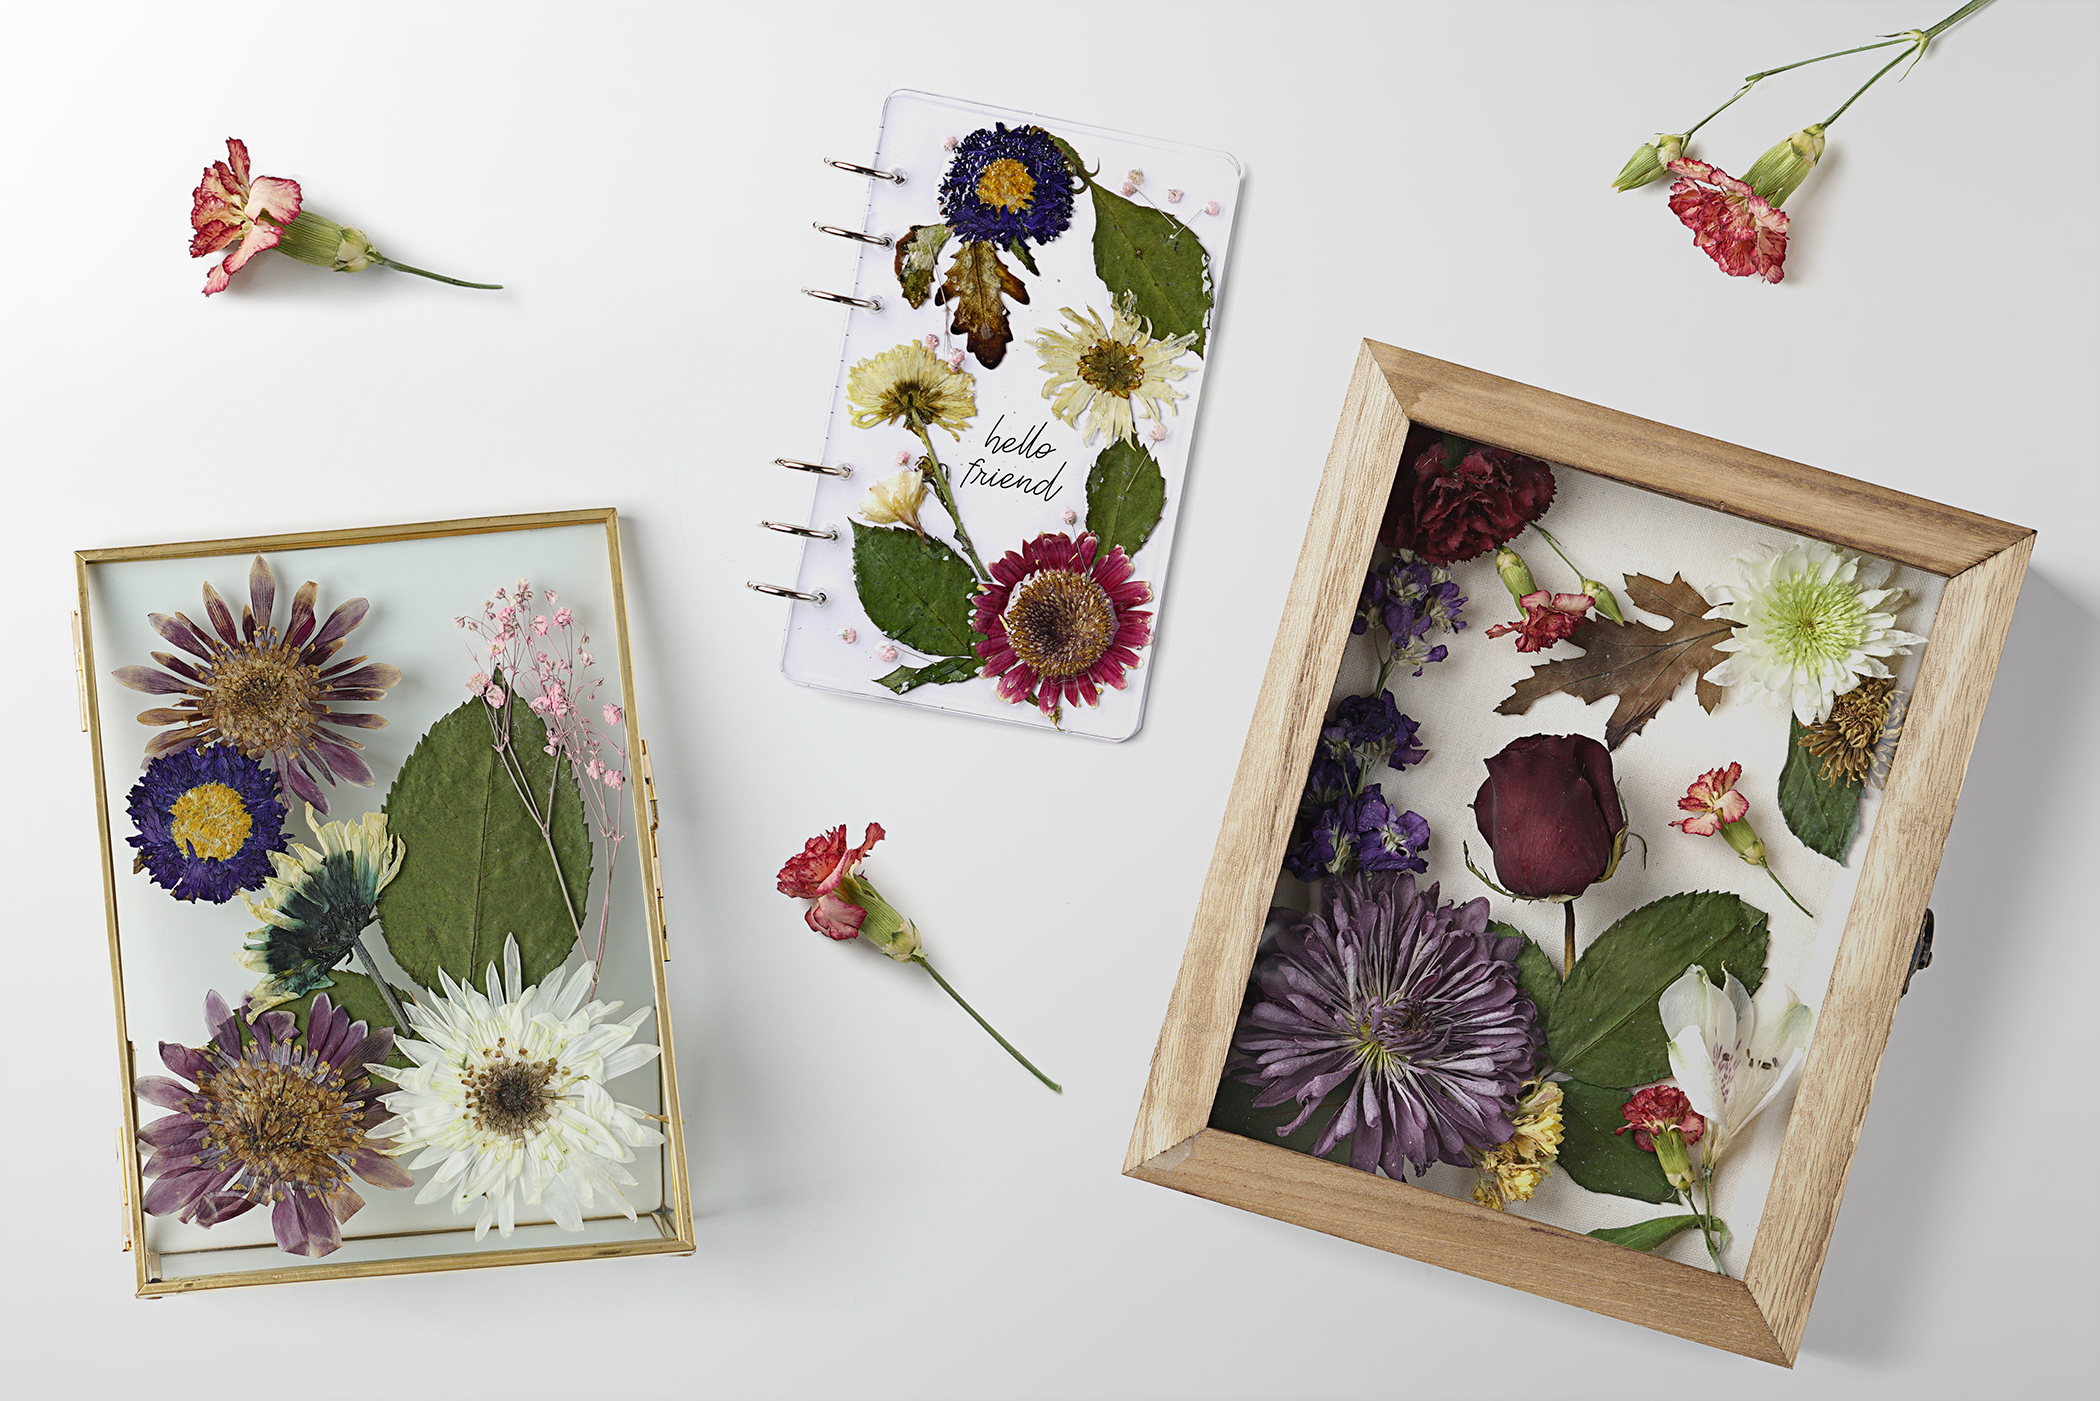 How To Preserve Flowers In A Picture Frame?